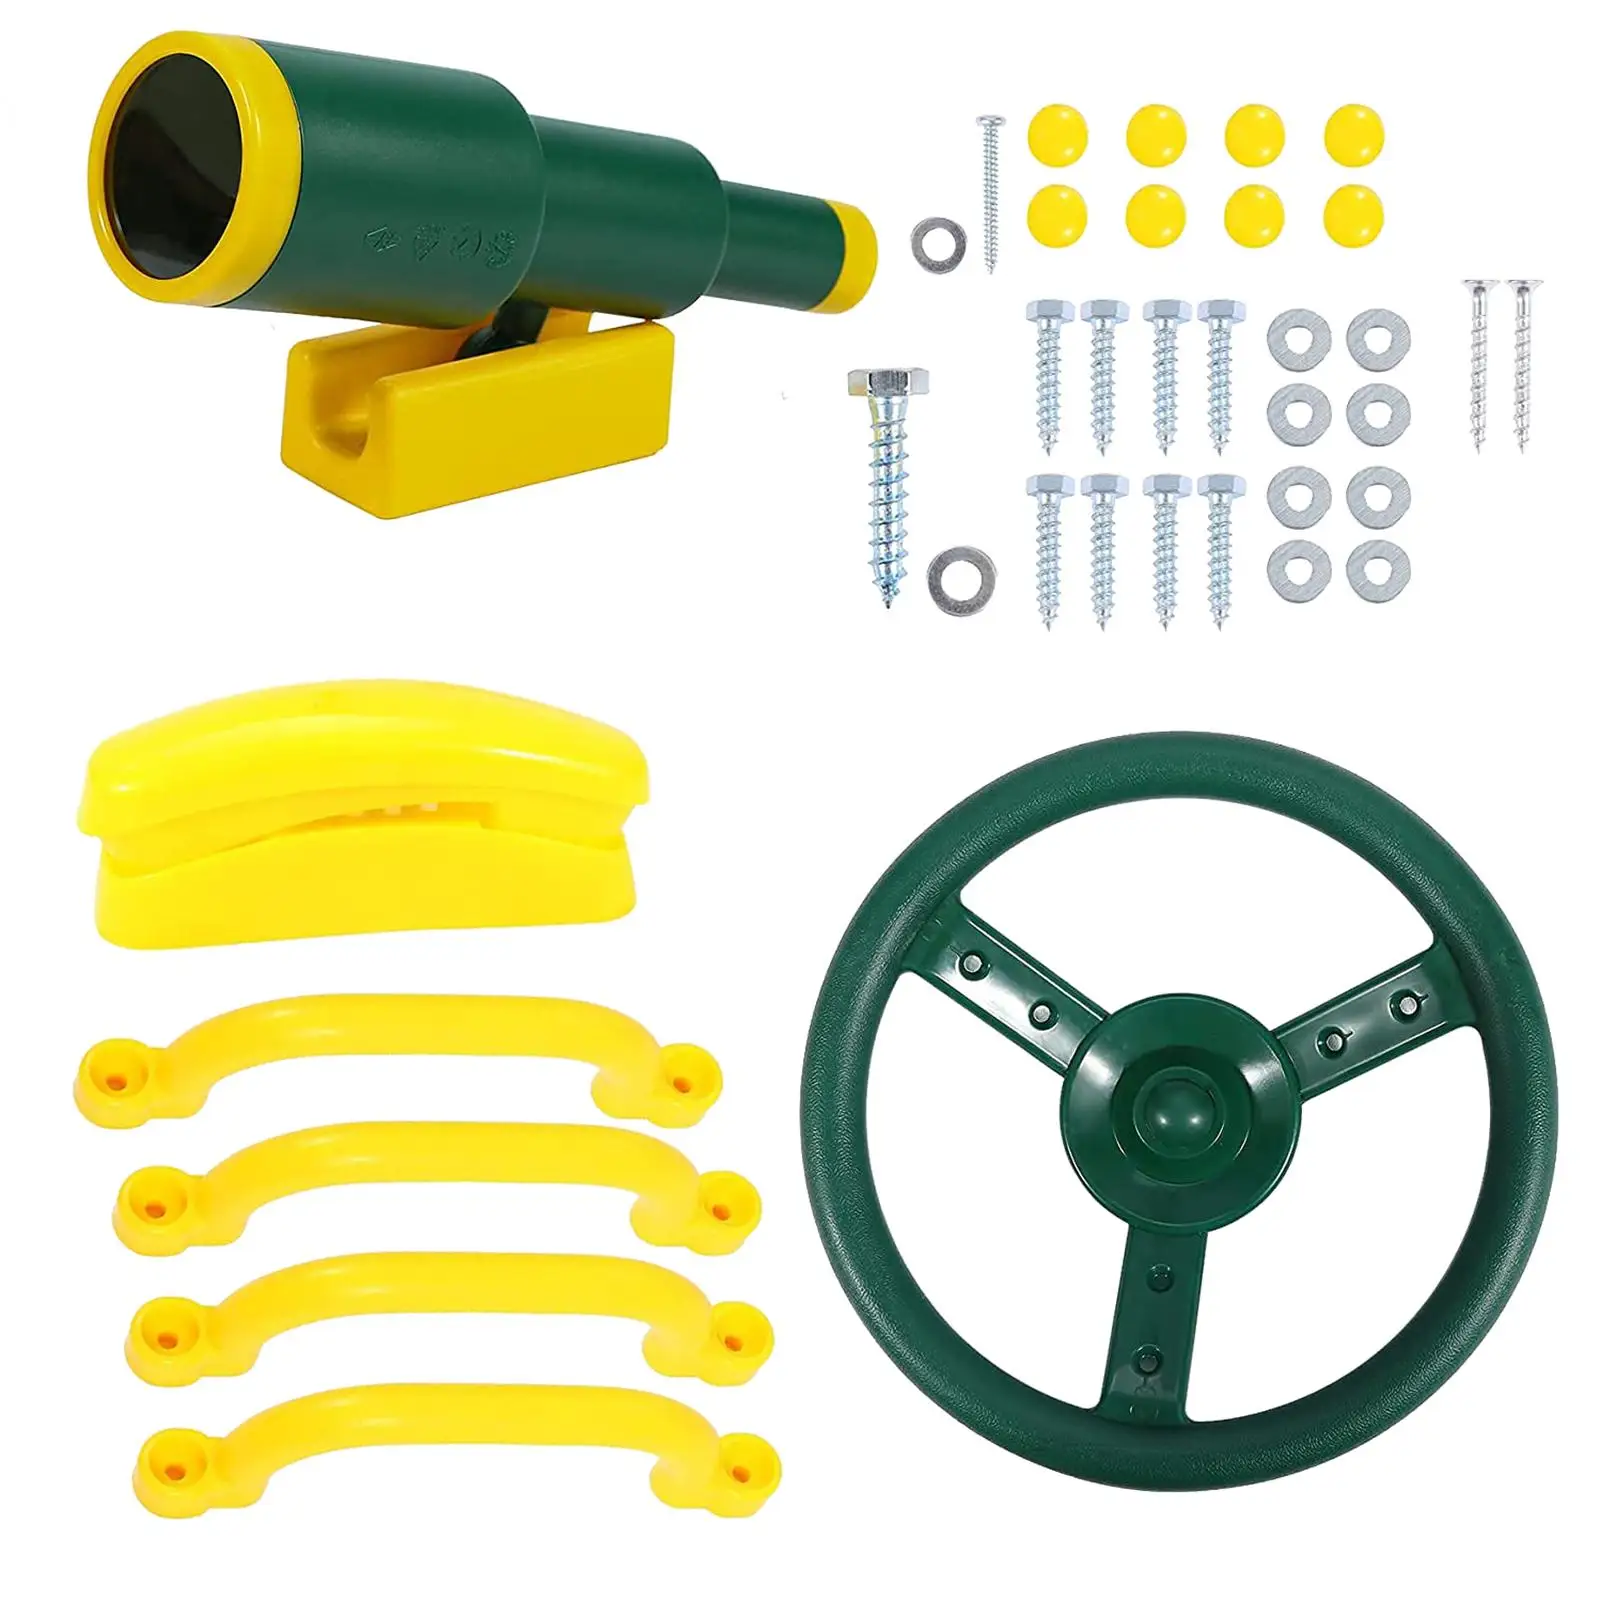 Playground Toy Set Learning Toy Grab Handle Steering Wheel Toy for Backyard, Climbing Frame